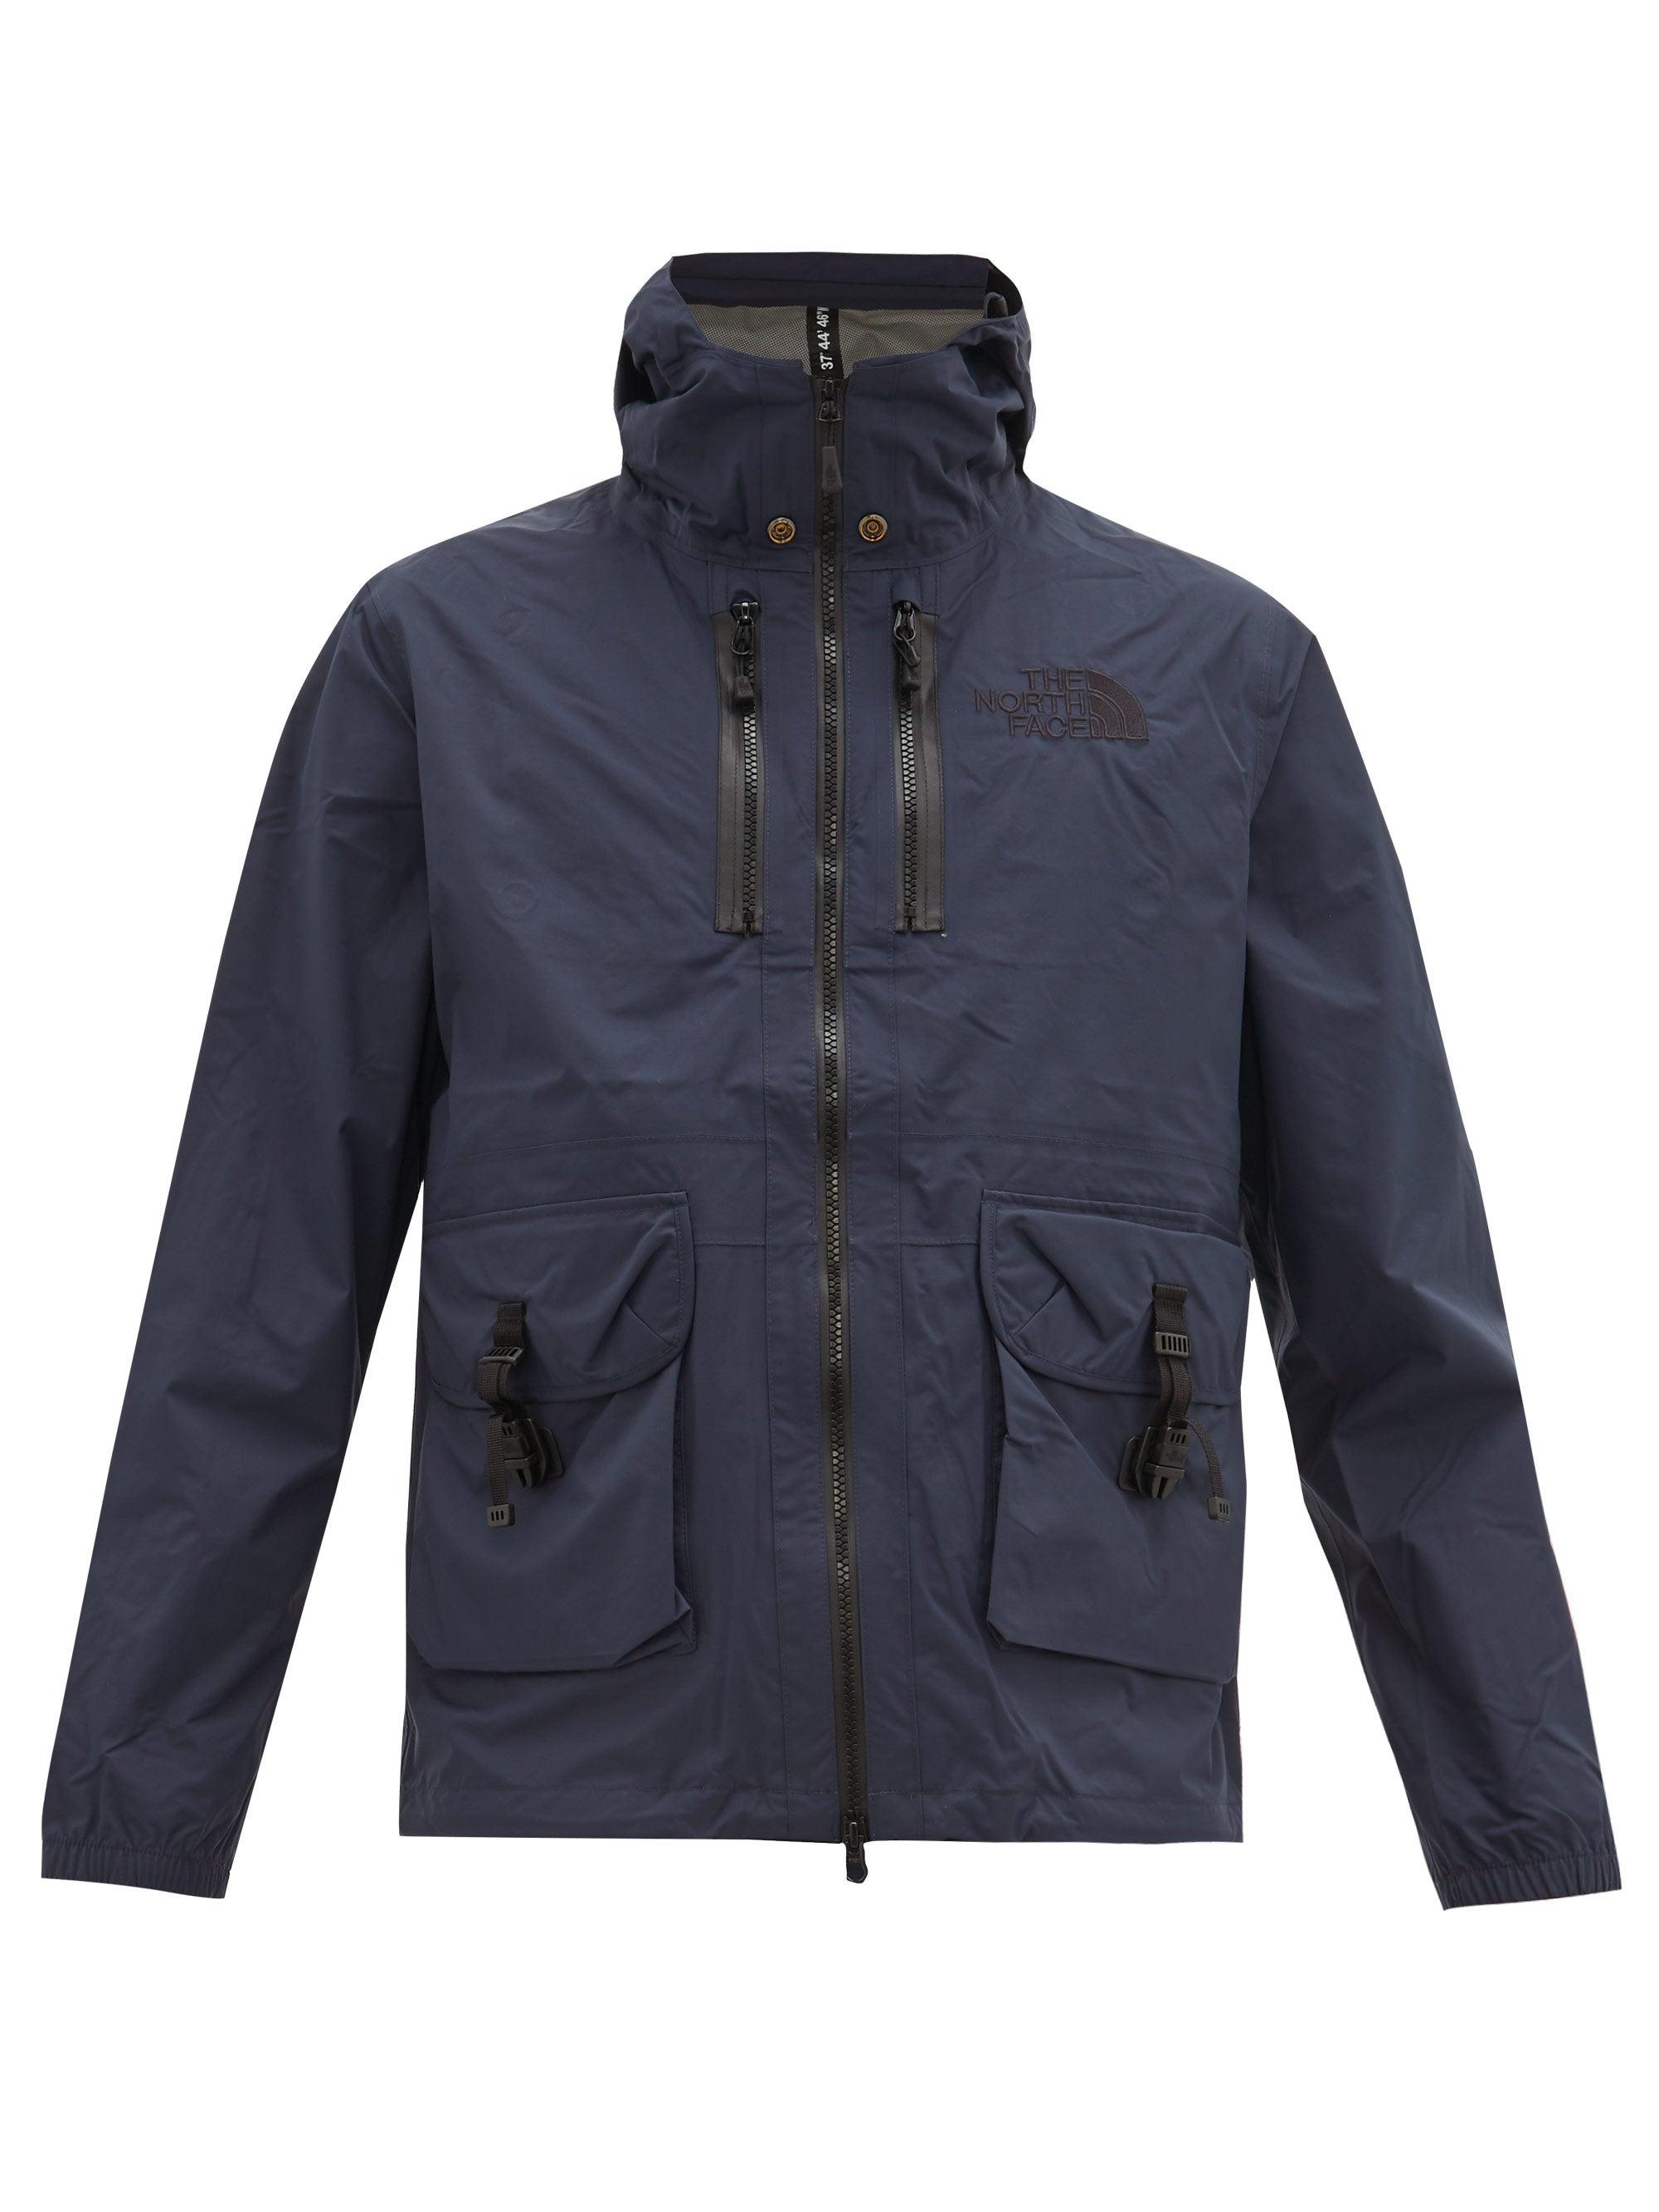 THE NORTH FACE BLACK SERIES X Kazuki Kuraishi Hooded Technical Jacket in  Navy (Blue) for Men | Lyst